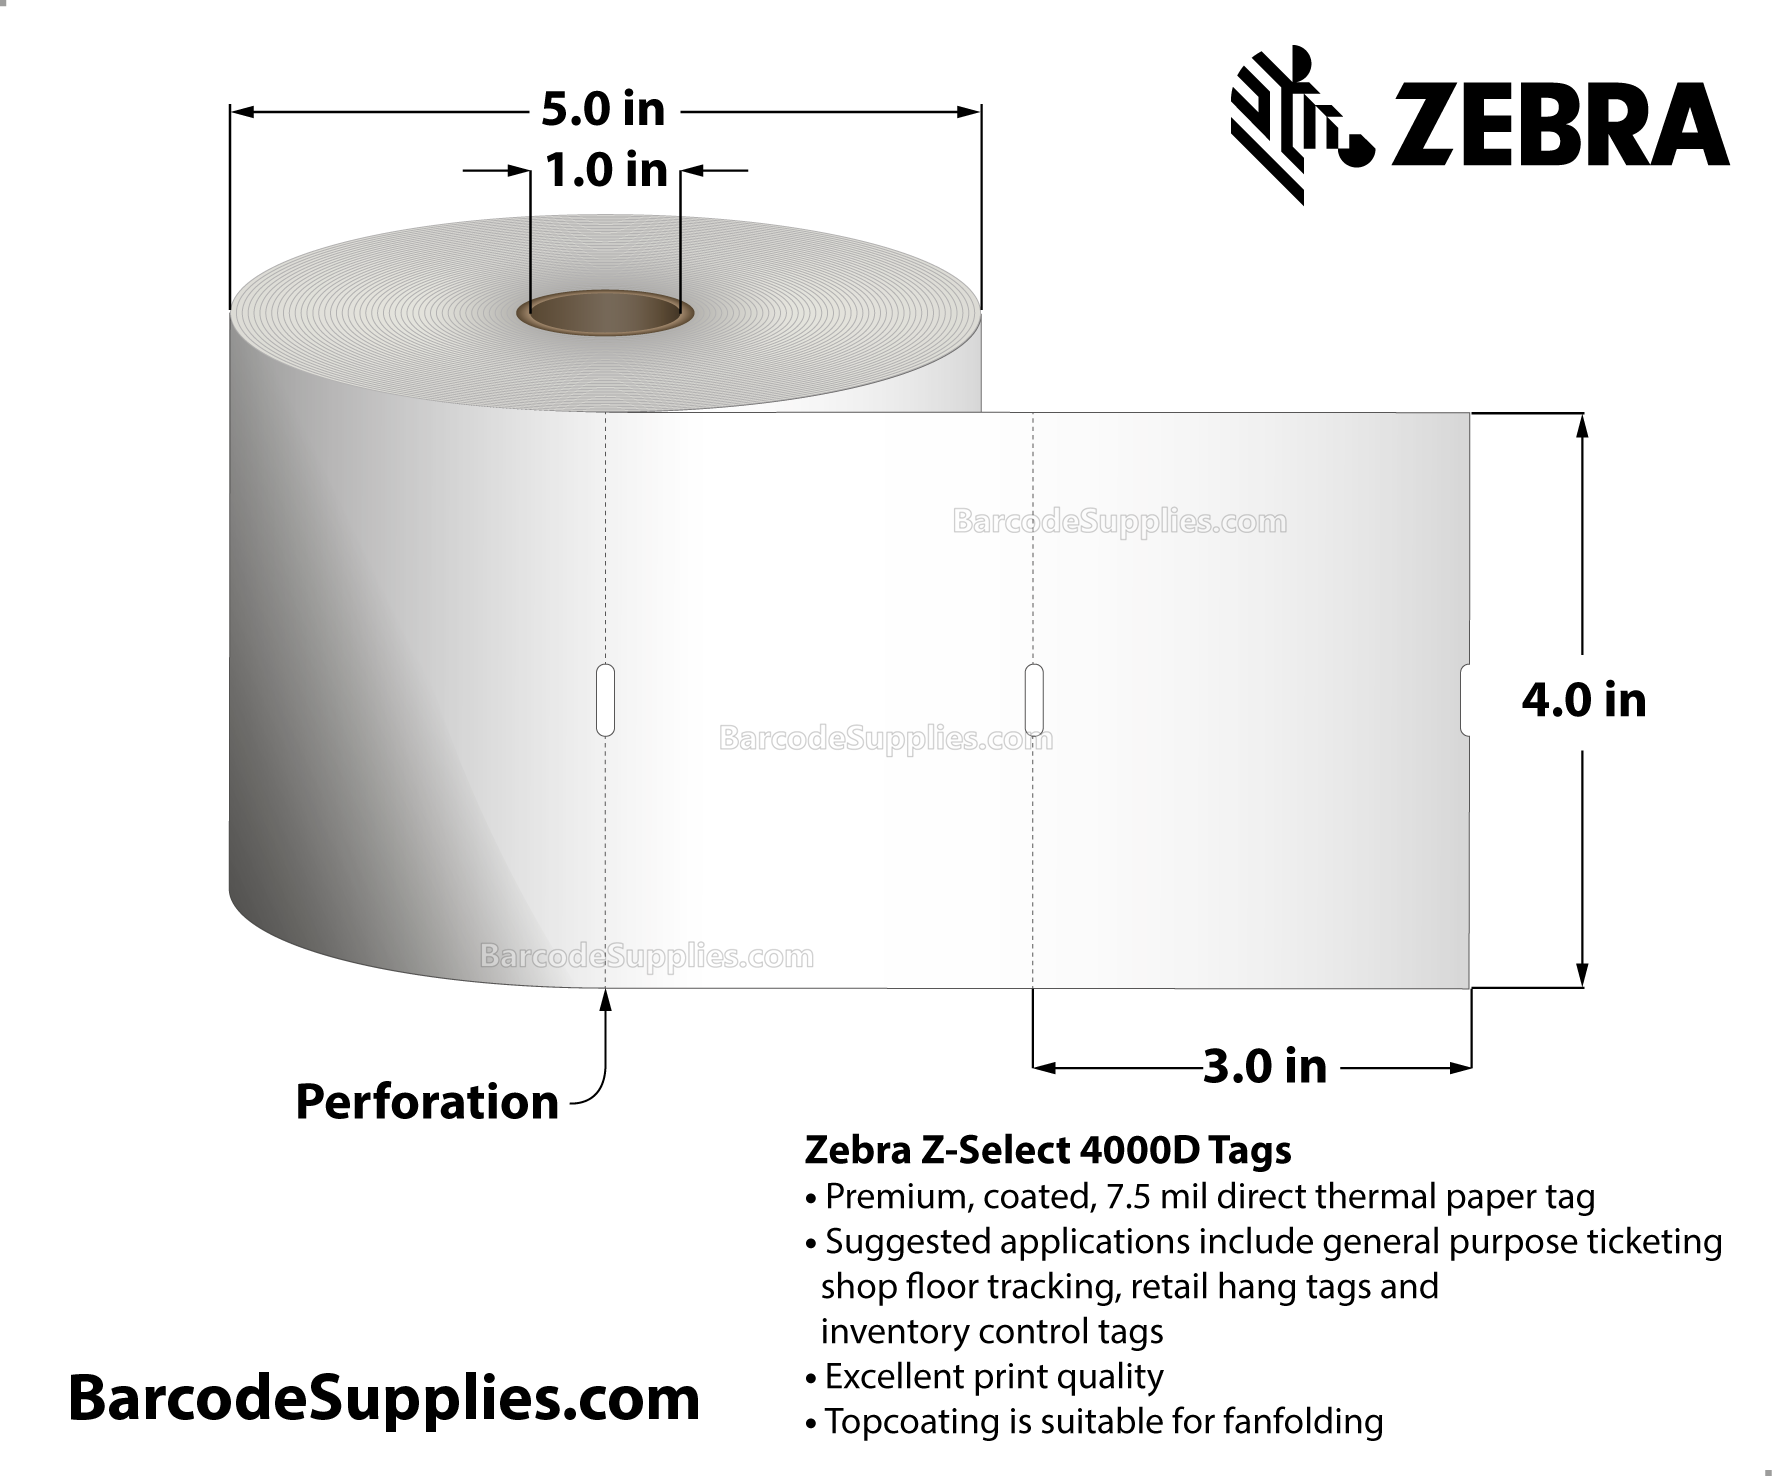 4 x 3 Direct Thermal White Z-Select 4000D 7 mil Tag Tags With No Adhesive - Contains sensing notch - Perforated - 730 Tags Per Roll - Carton Of 4 Rolls - 2920 Tags Total - MPN: 10010056